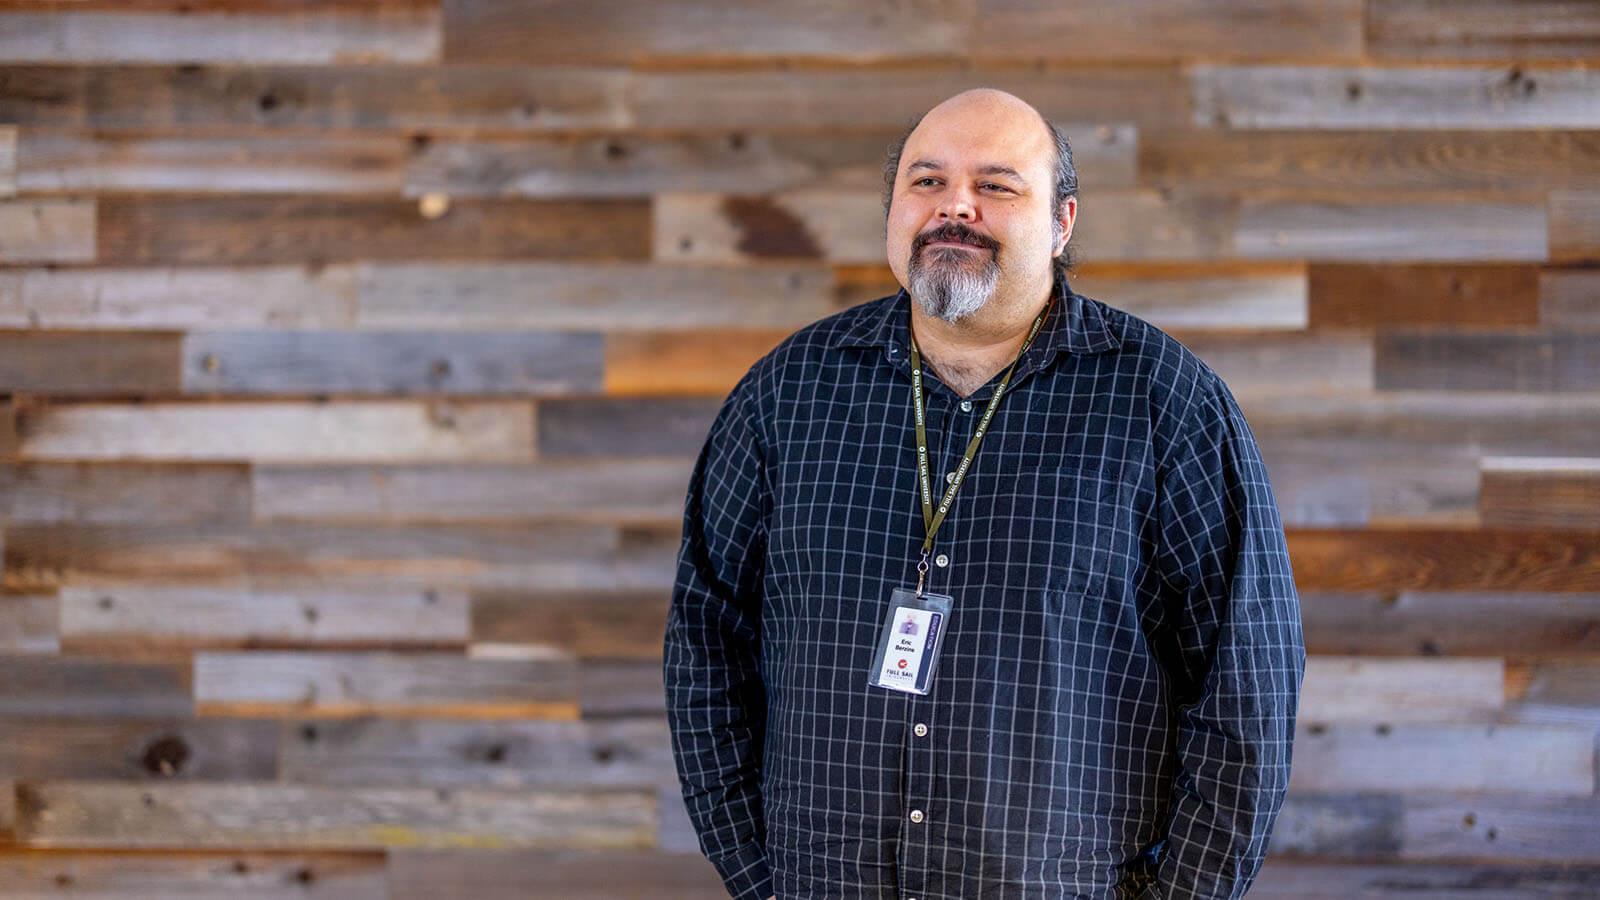 Instructor Eric Berzins, a man with a grey goatee, standing in front of a wood paneled wall wearing a blue button down dress shirt and green Full Sail lanyard with name badge.